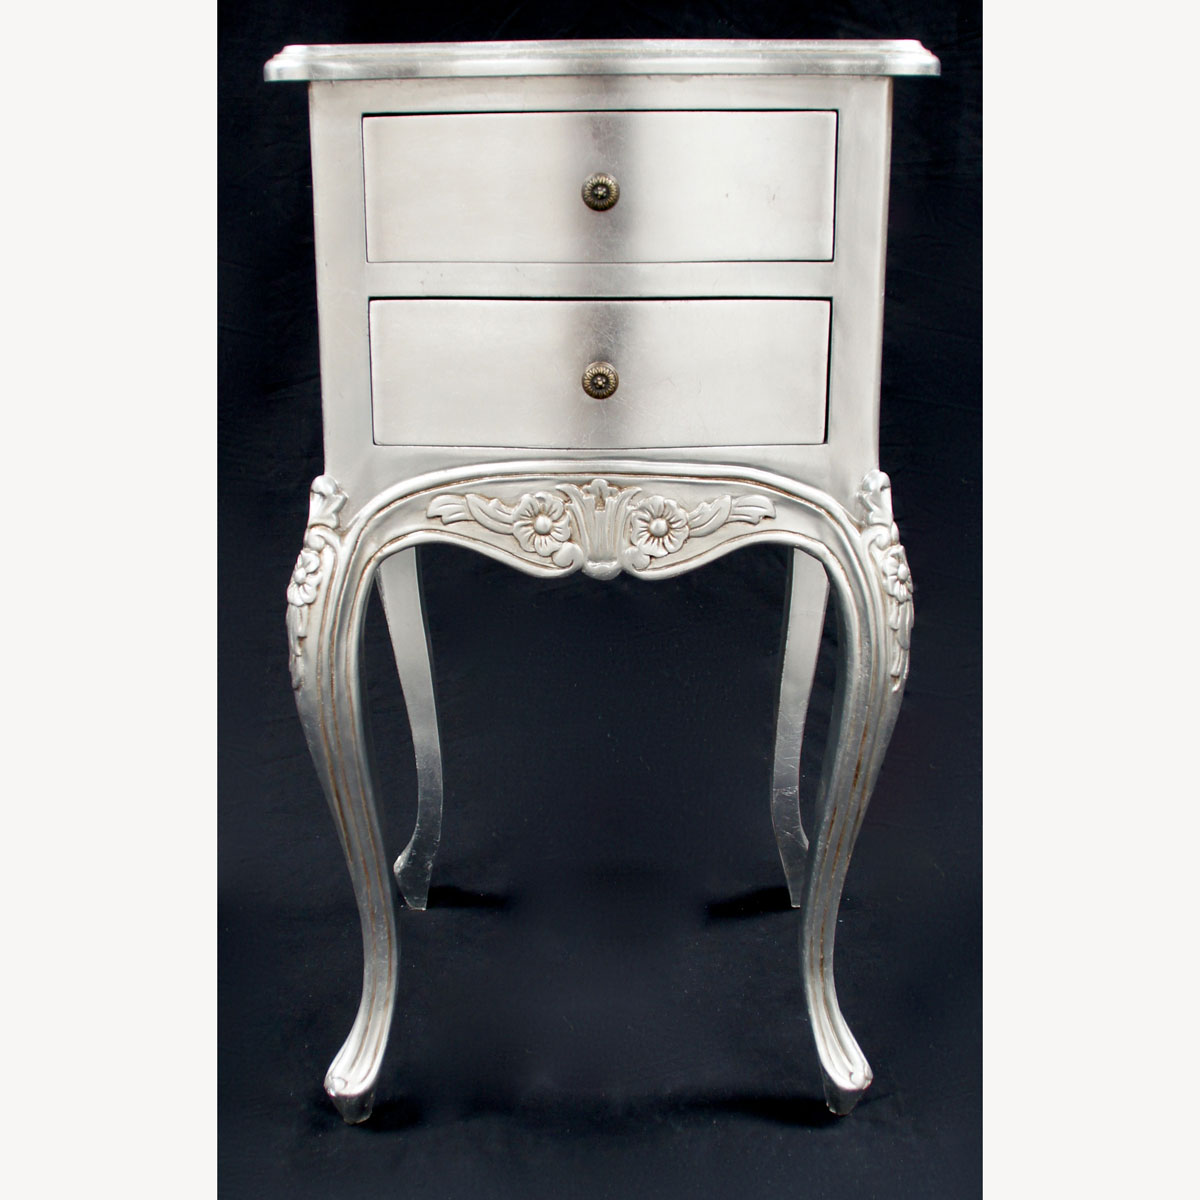 Beautiful Parisian Ornate Two Drawer Lamp Side Table Or Bedside Cabinet Shown In Silver Leaf - Hampshire Barn Interiors - Beautiful Parisian Ornate Two Drawer Lamp Side Table Or Bedside Cabinet Shown In Silver Leaf -